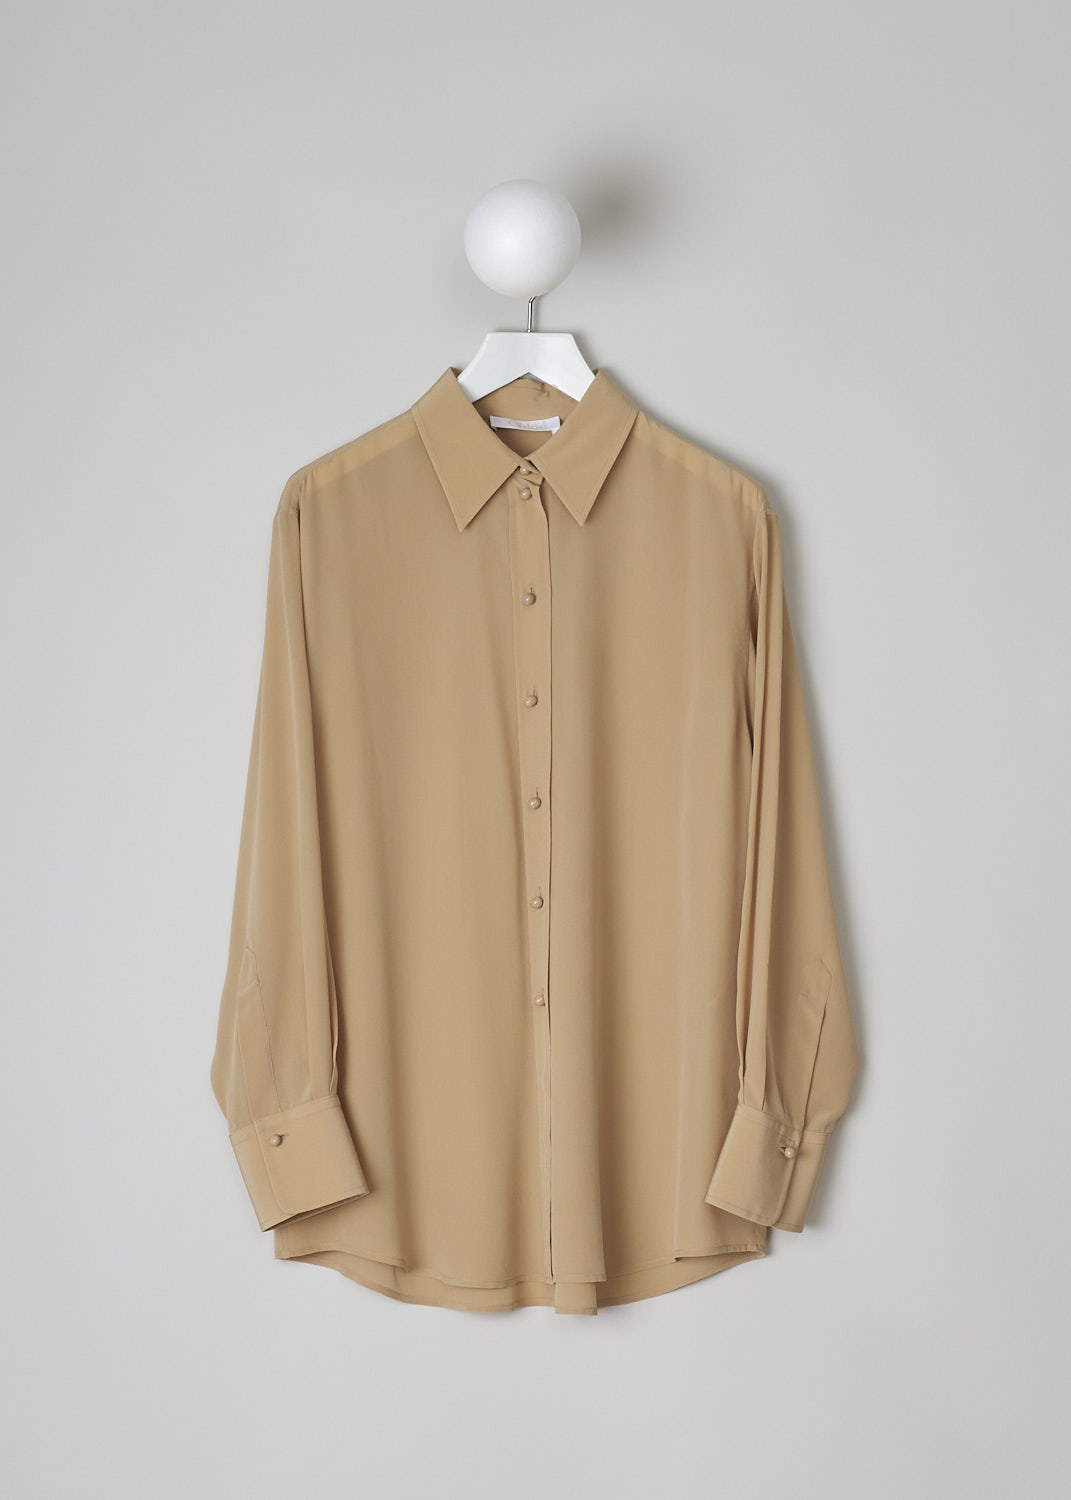 CHLOÉ, PEARL BEIGE BLOUSE, CHC22UHT05004278, Beige, Front, This silk pearl beige blouse has a classic collar and a button placket with round ceramic. The blouse has long sleeves with buttoned cuffs.  A centre box pleat runs vertically down the back.
